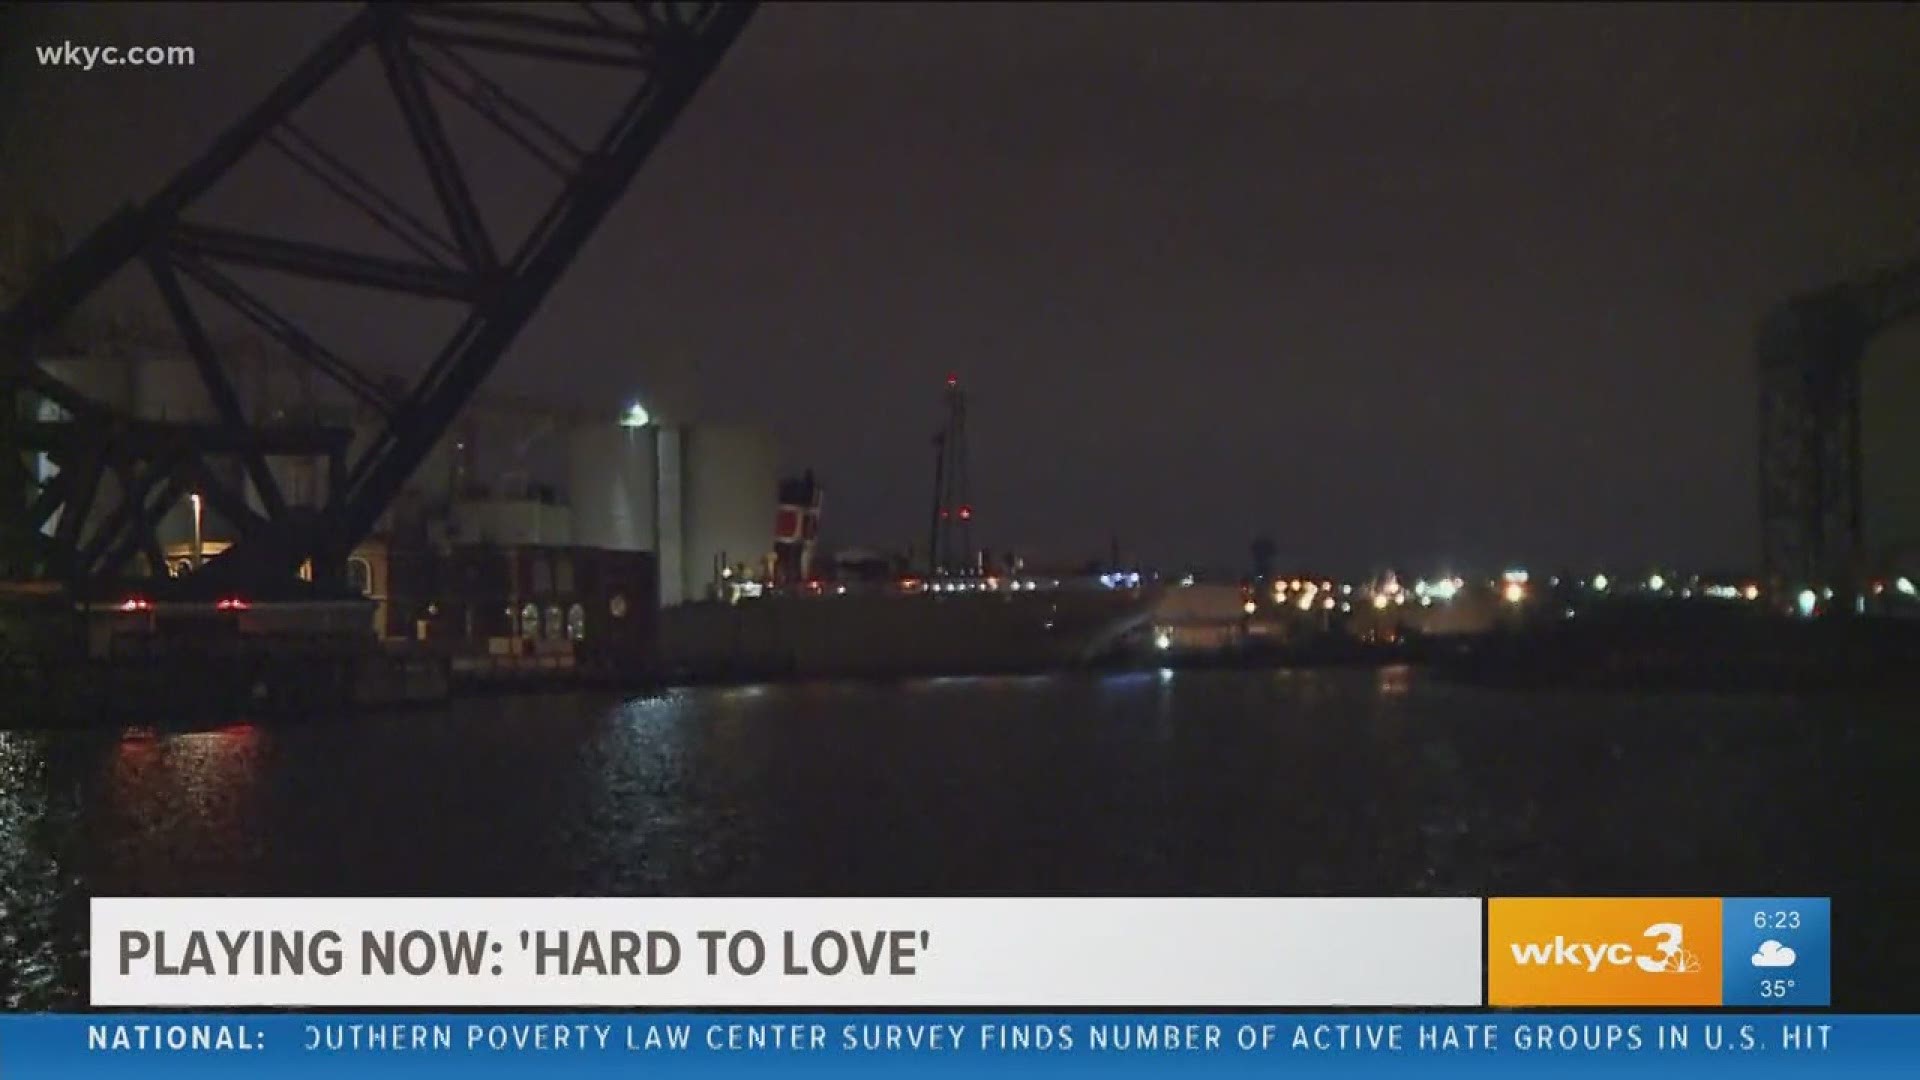 On Feb. 21, a WKYC camera captured a strange flying object over Cleveland.